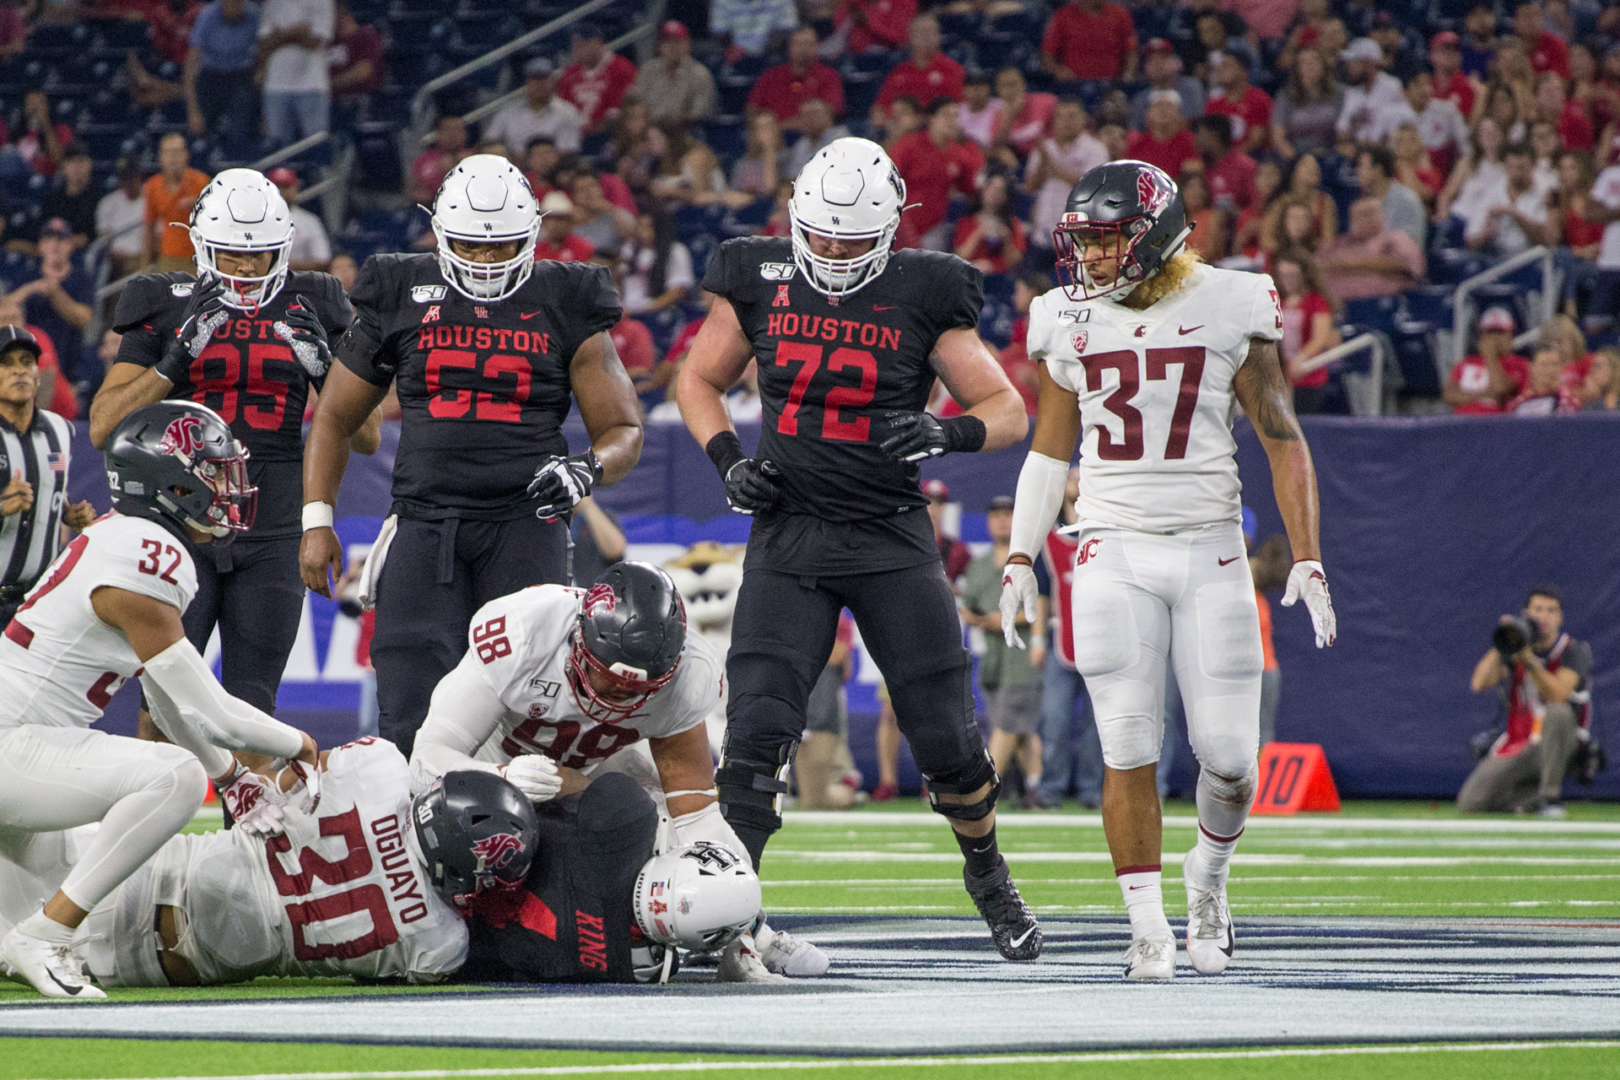 Former tackle Justin Murphy (72), no longer a part of the team but still a student at the University, criticized Houston in a Thursday night tweetstorm that called out the program for its handling of its 2019 season. | Trevor Nolley/The Cougar